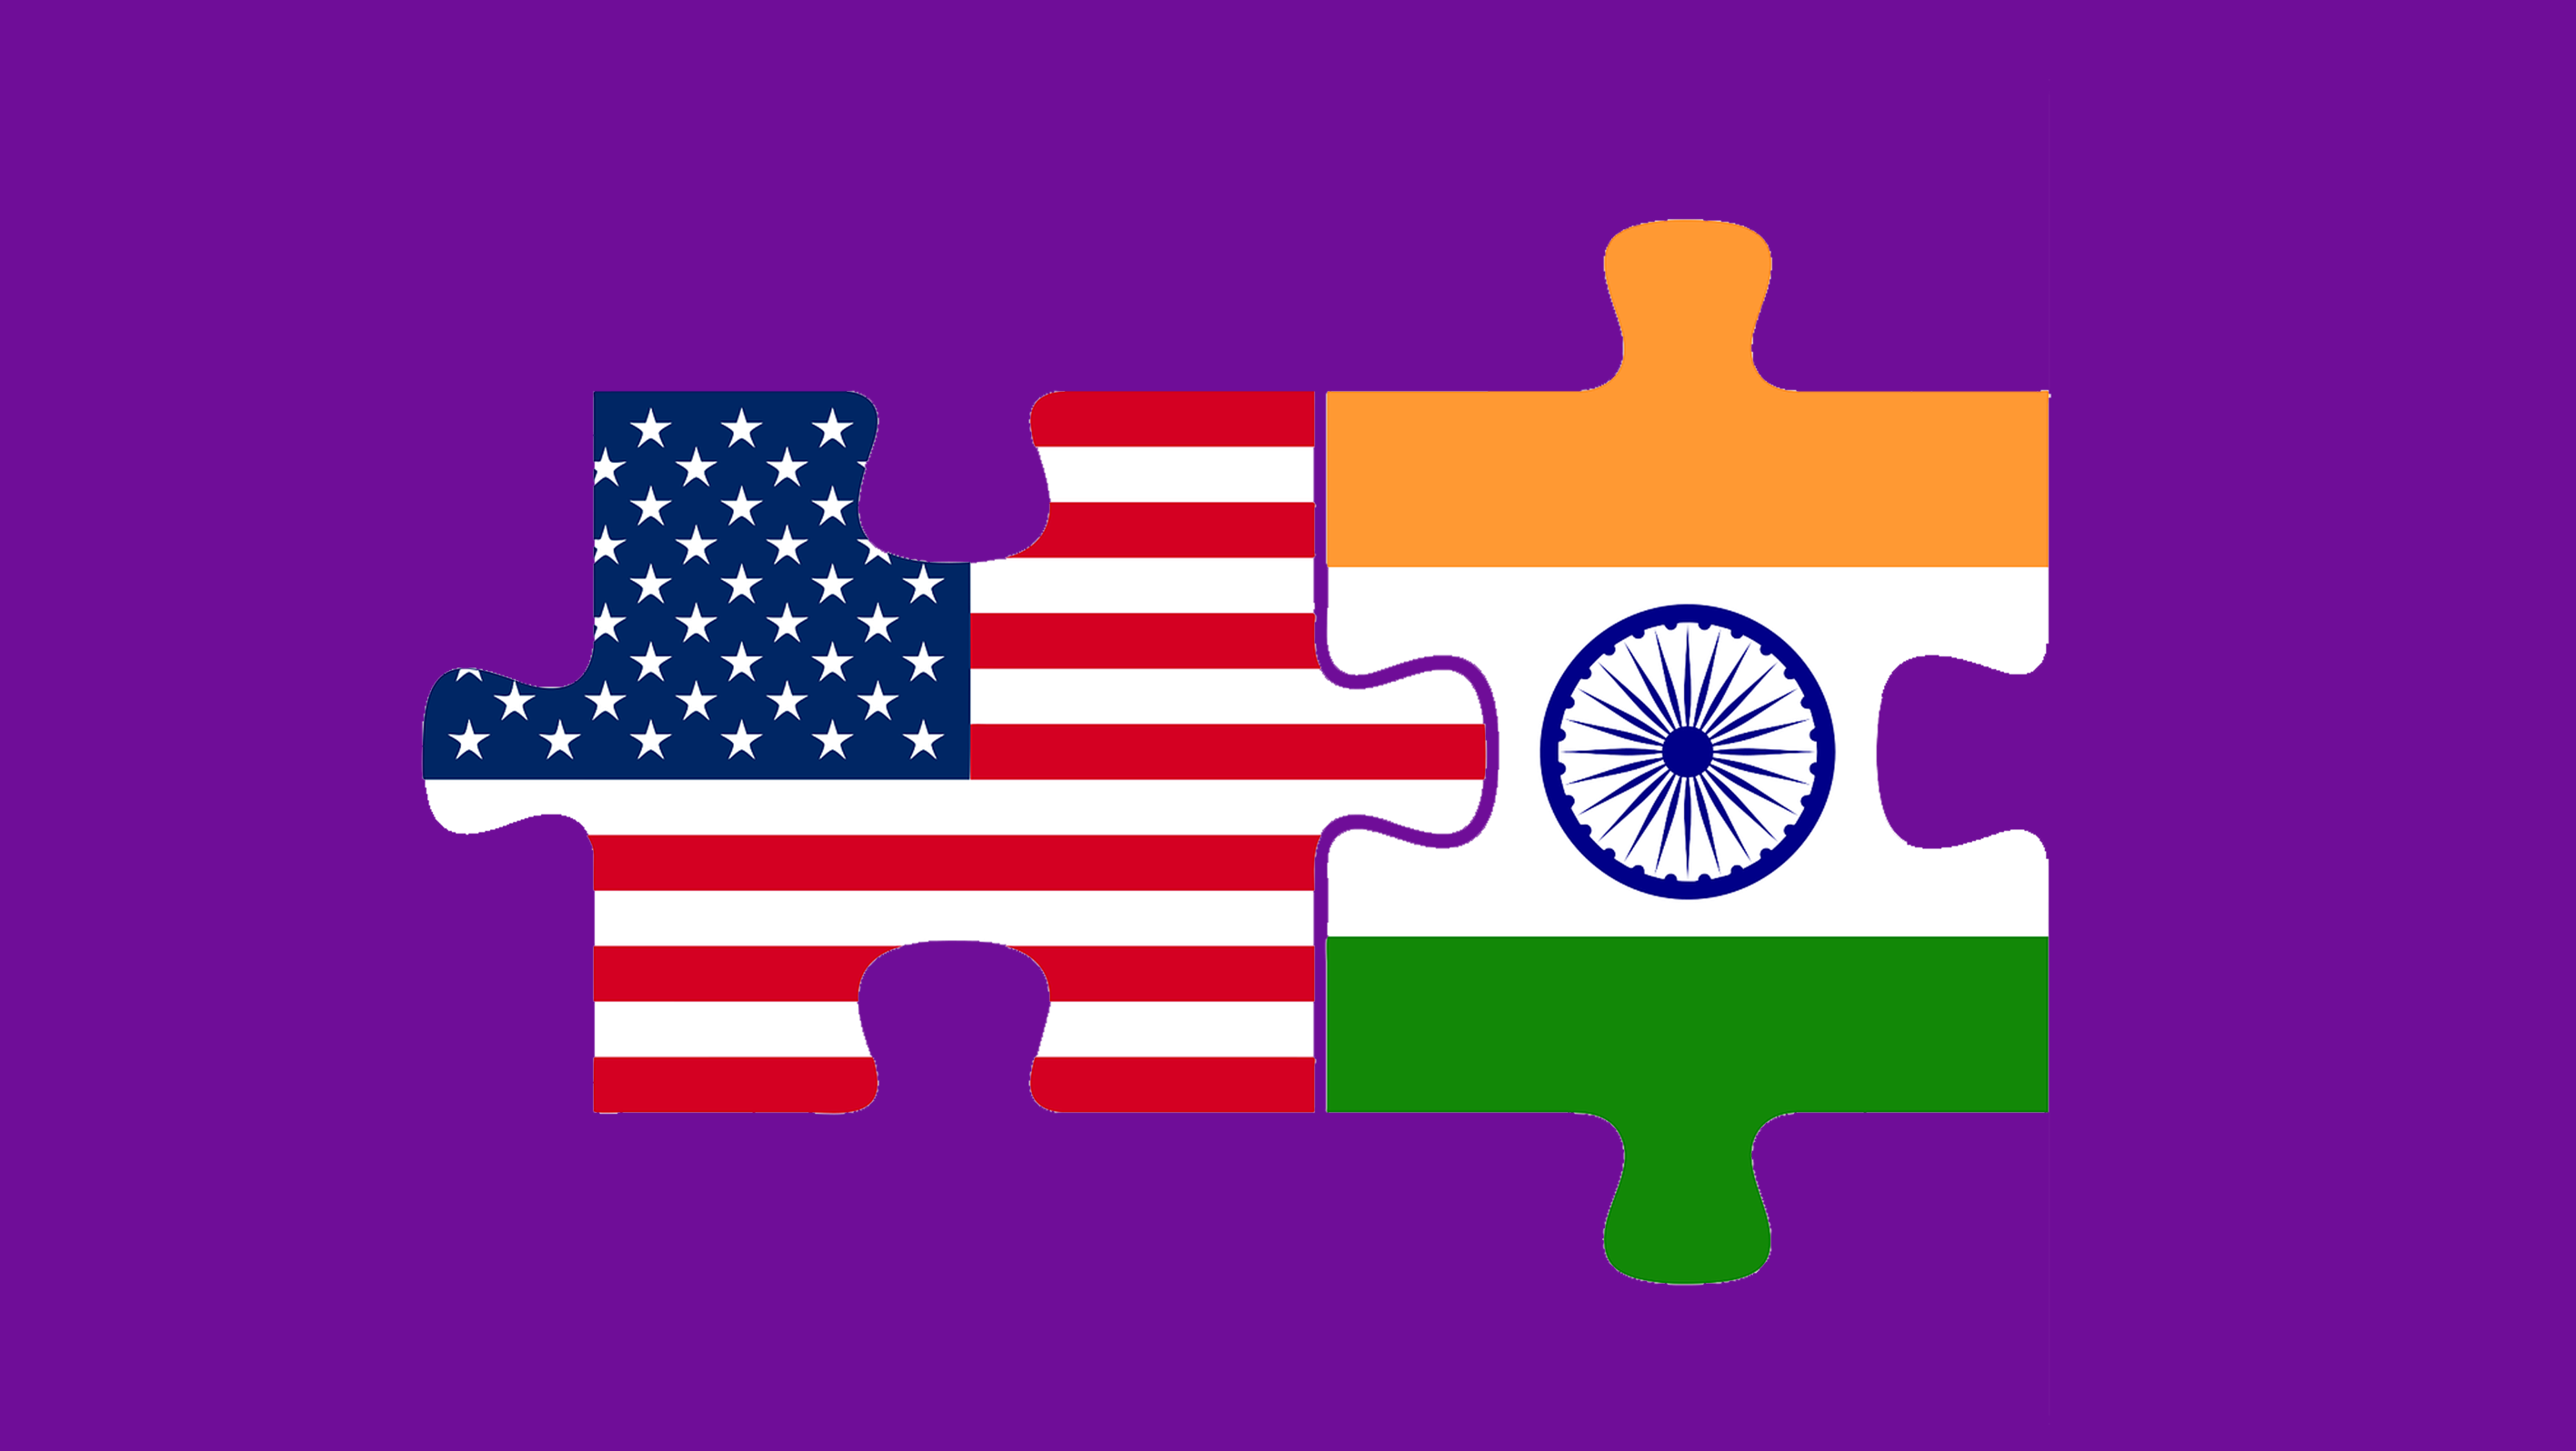 The American flag and the Indian flag are connected like two puzzle pieces, on a deep purple background.